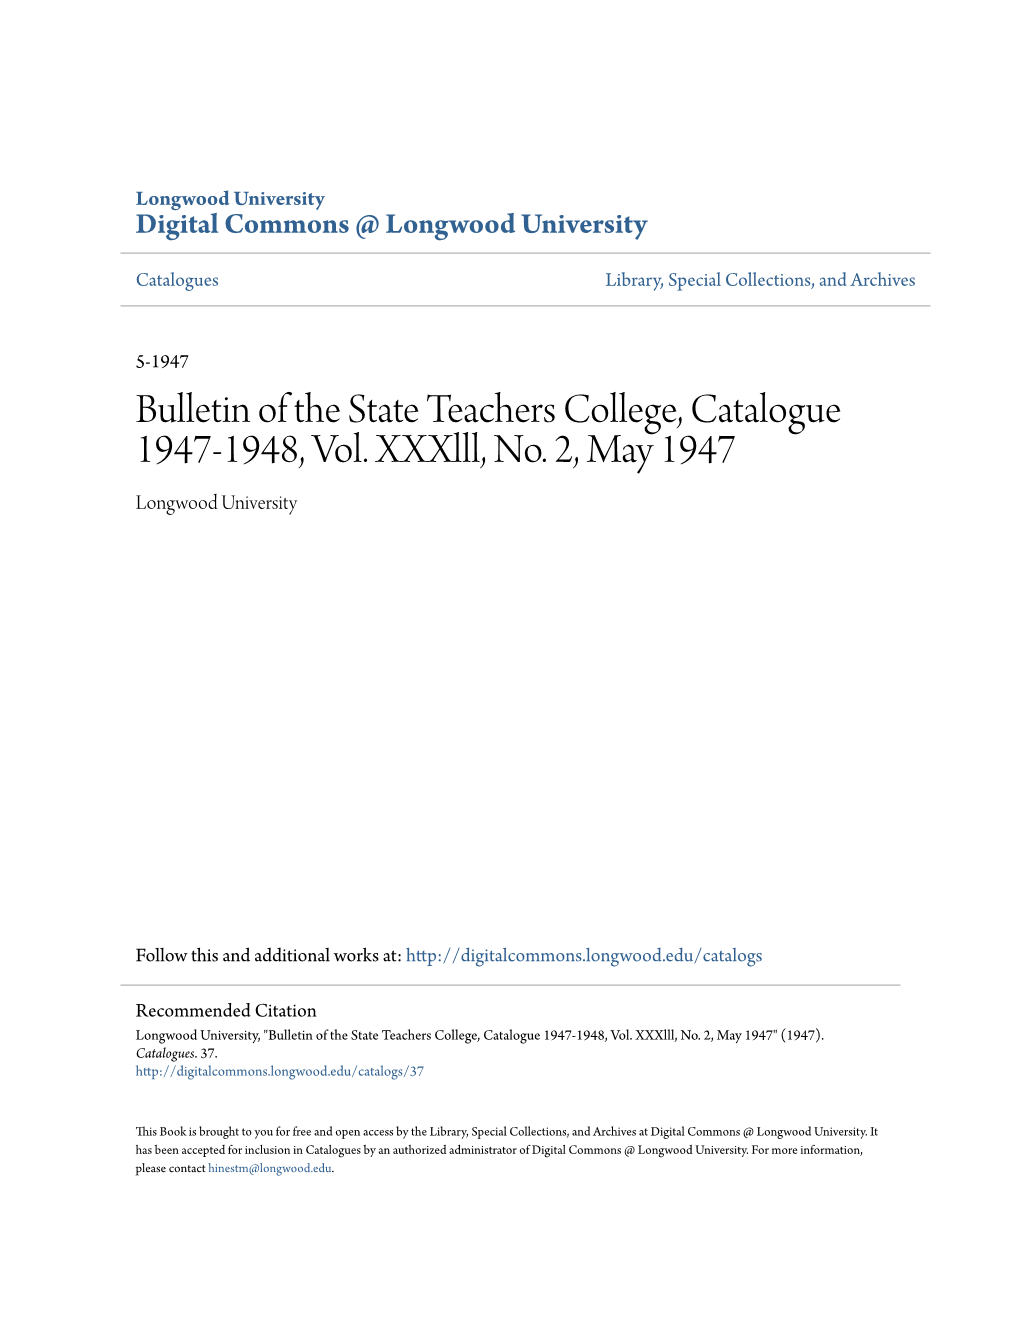 Bulletin of the State Teachers College, Catalogue 1947-1948, Vol. Xxxlll, No. 2, May 1947 Longwood University